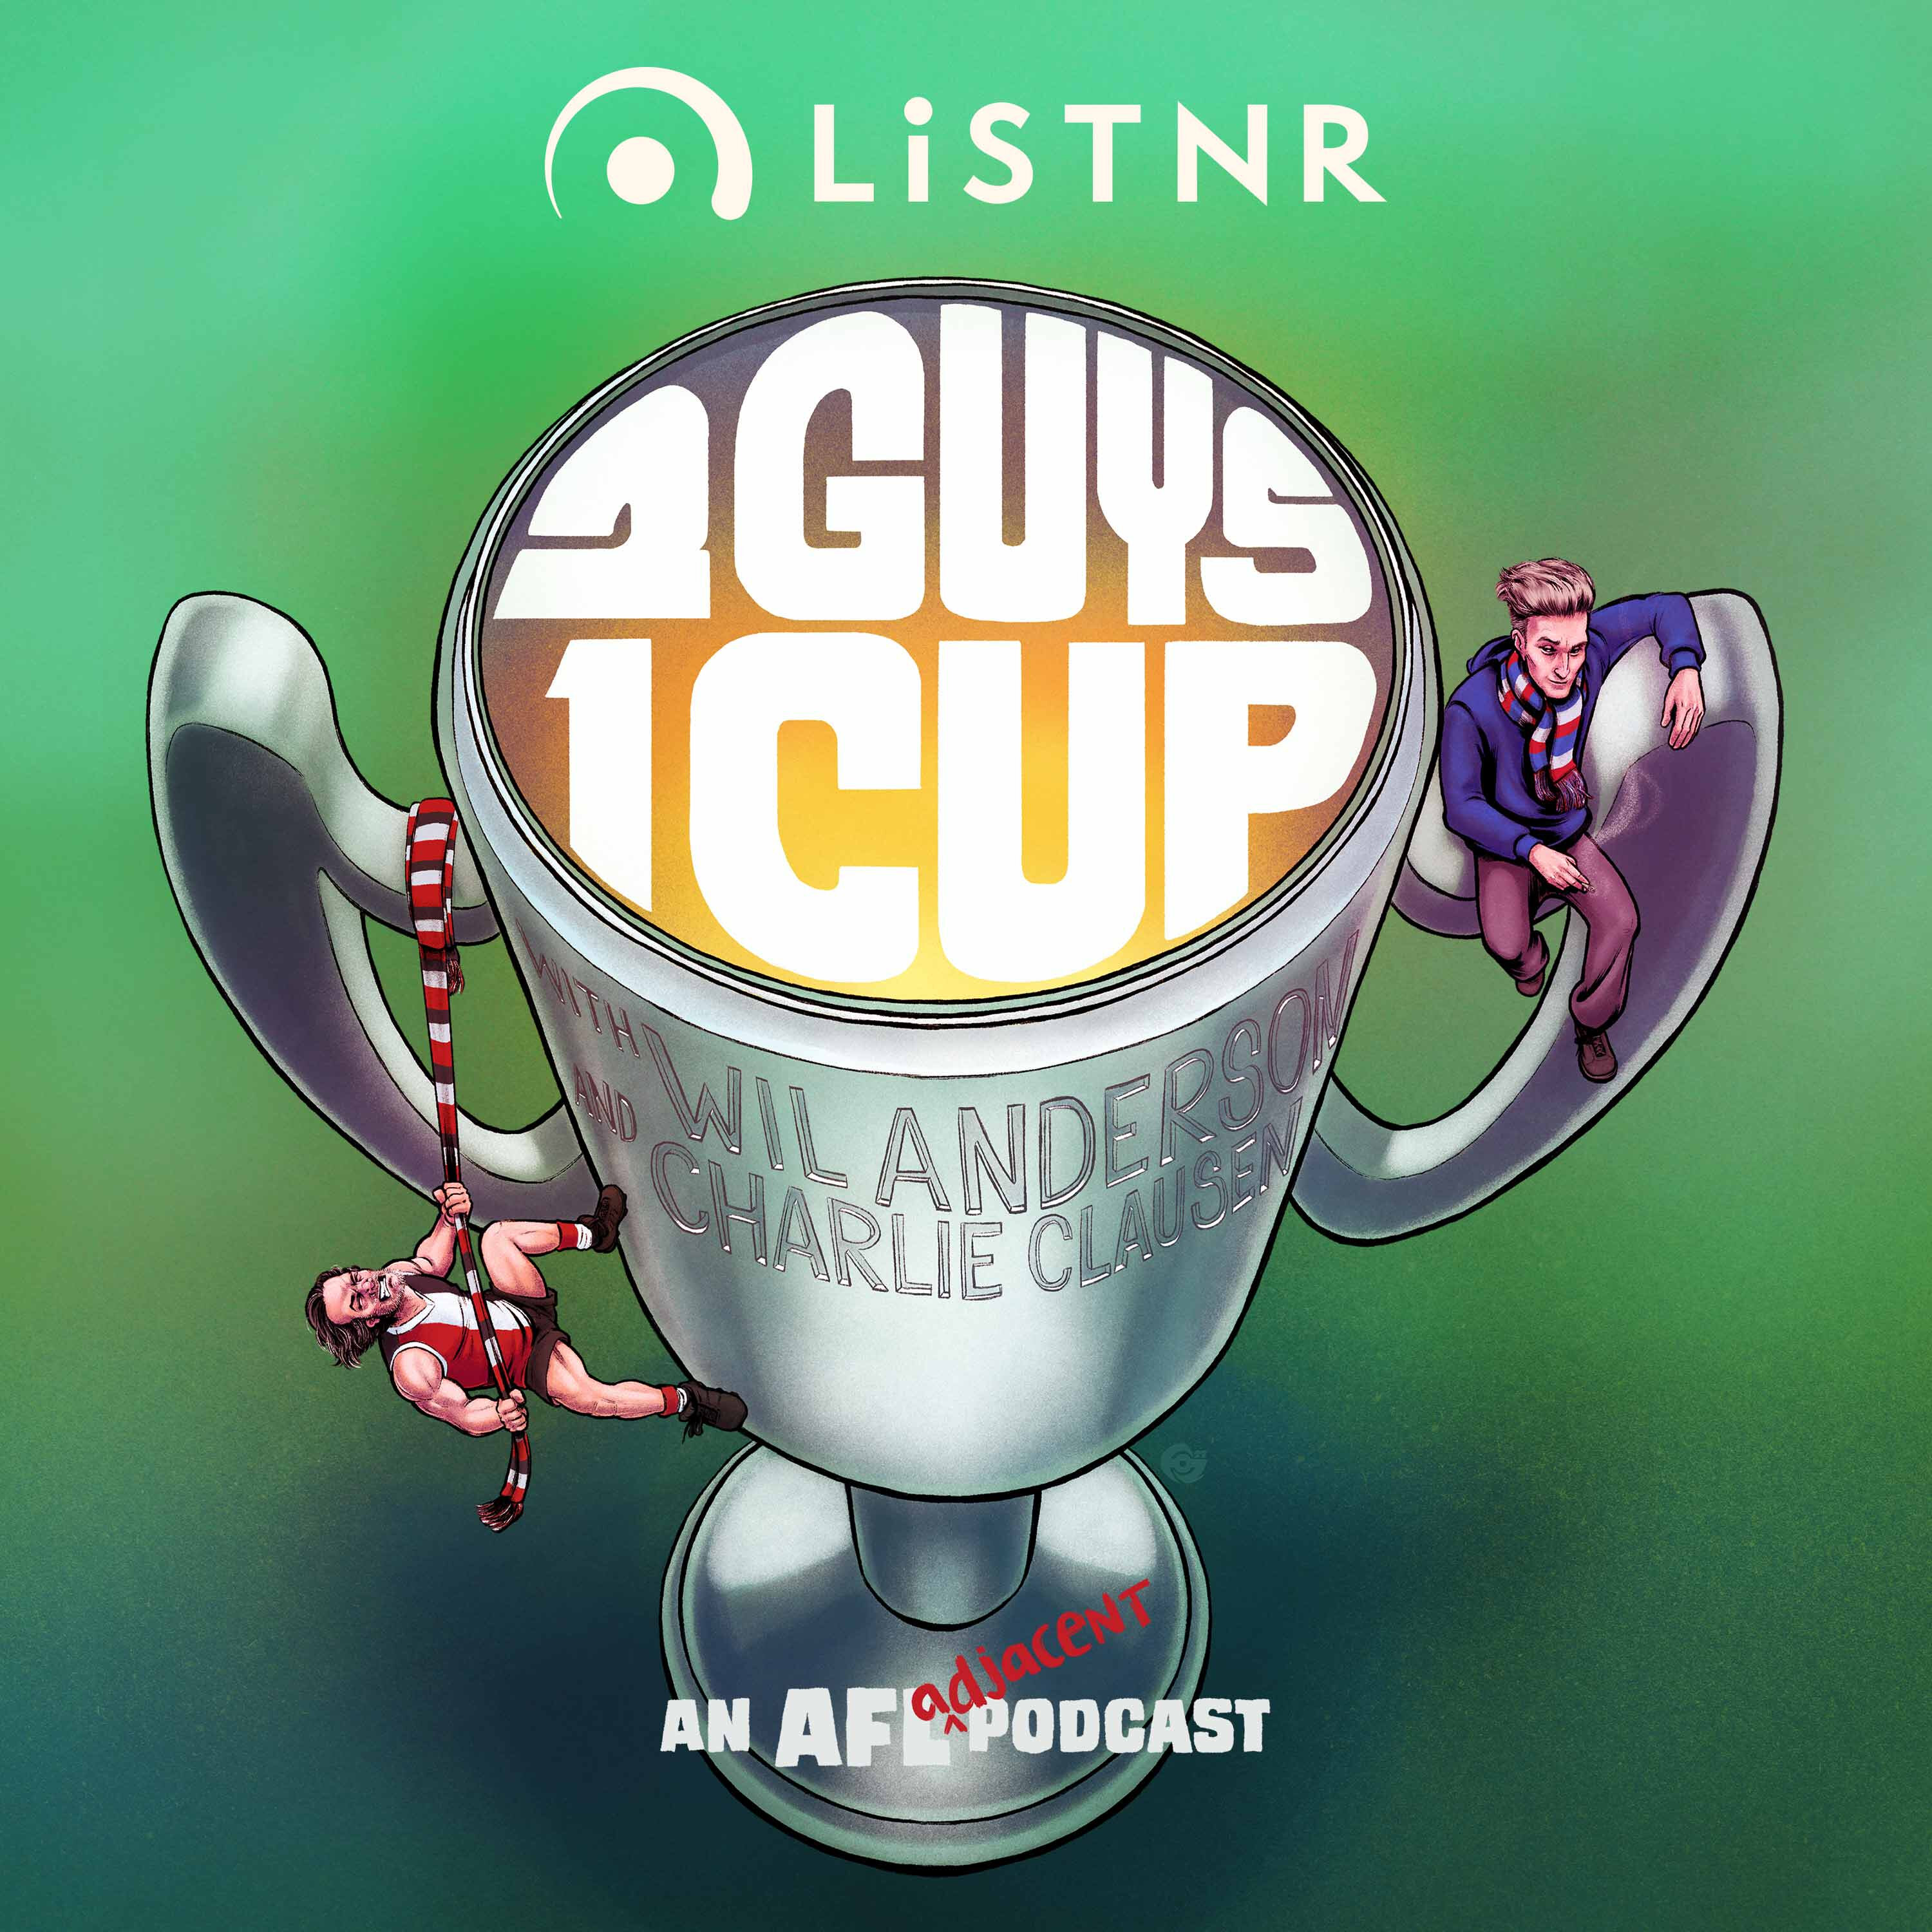 2 Guys 1 Cup is Moving to LiSTNR!